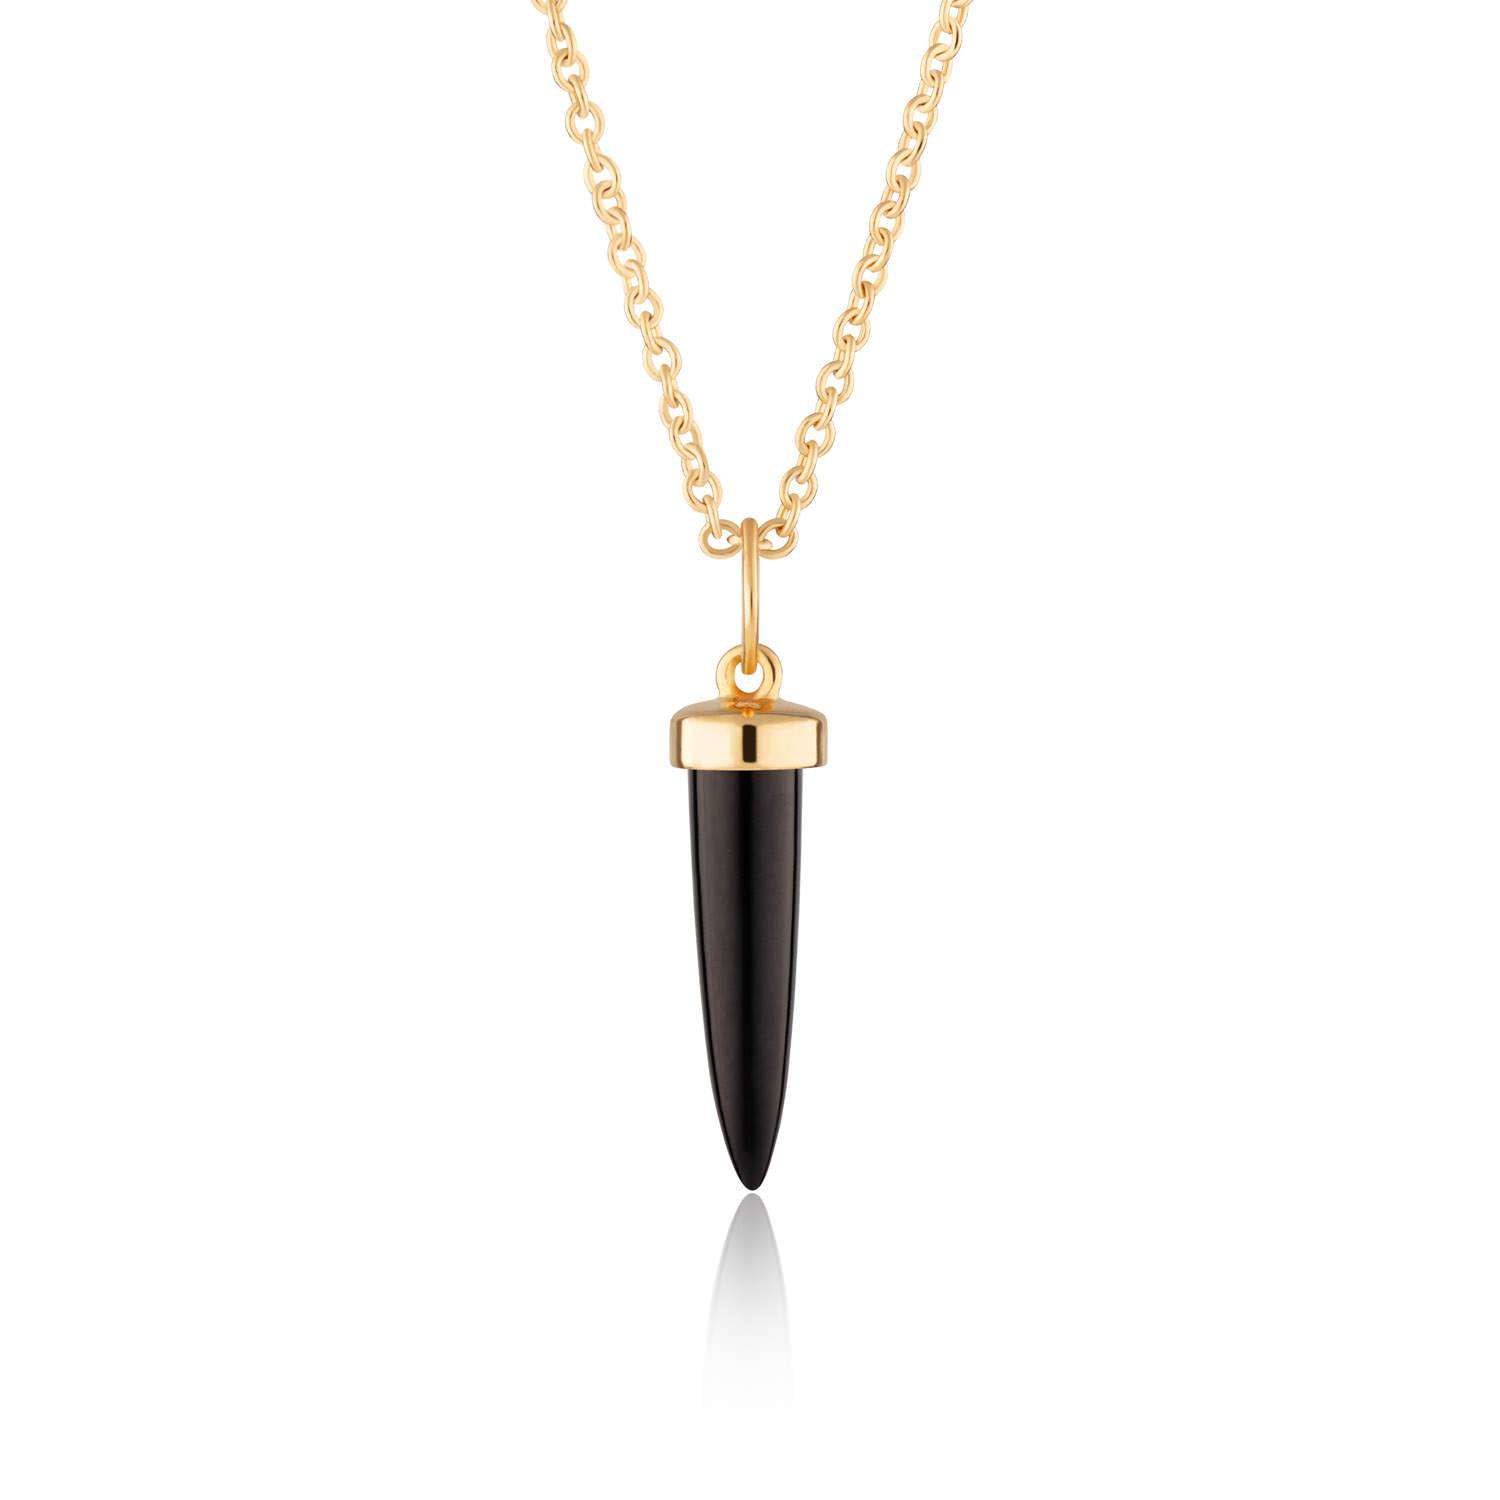 Black Spike Necklace with Slider Clasp